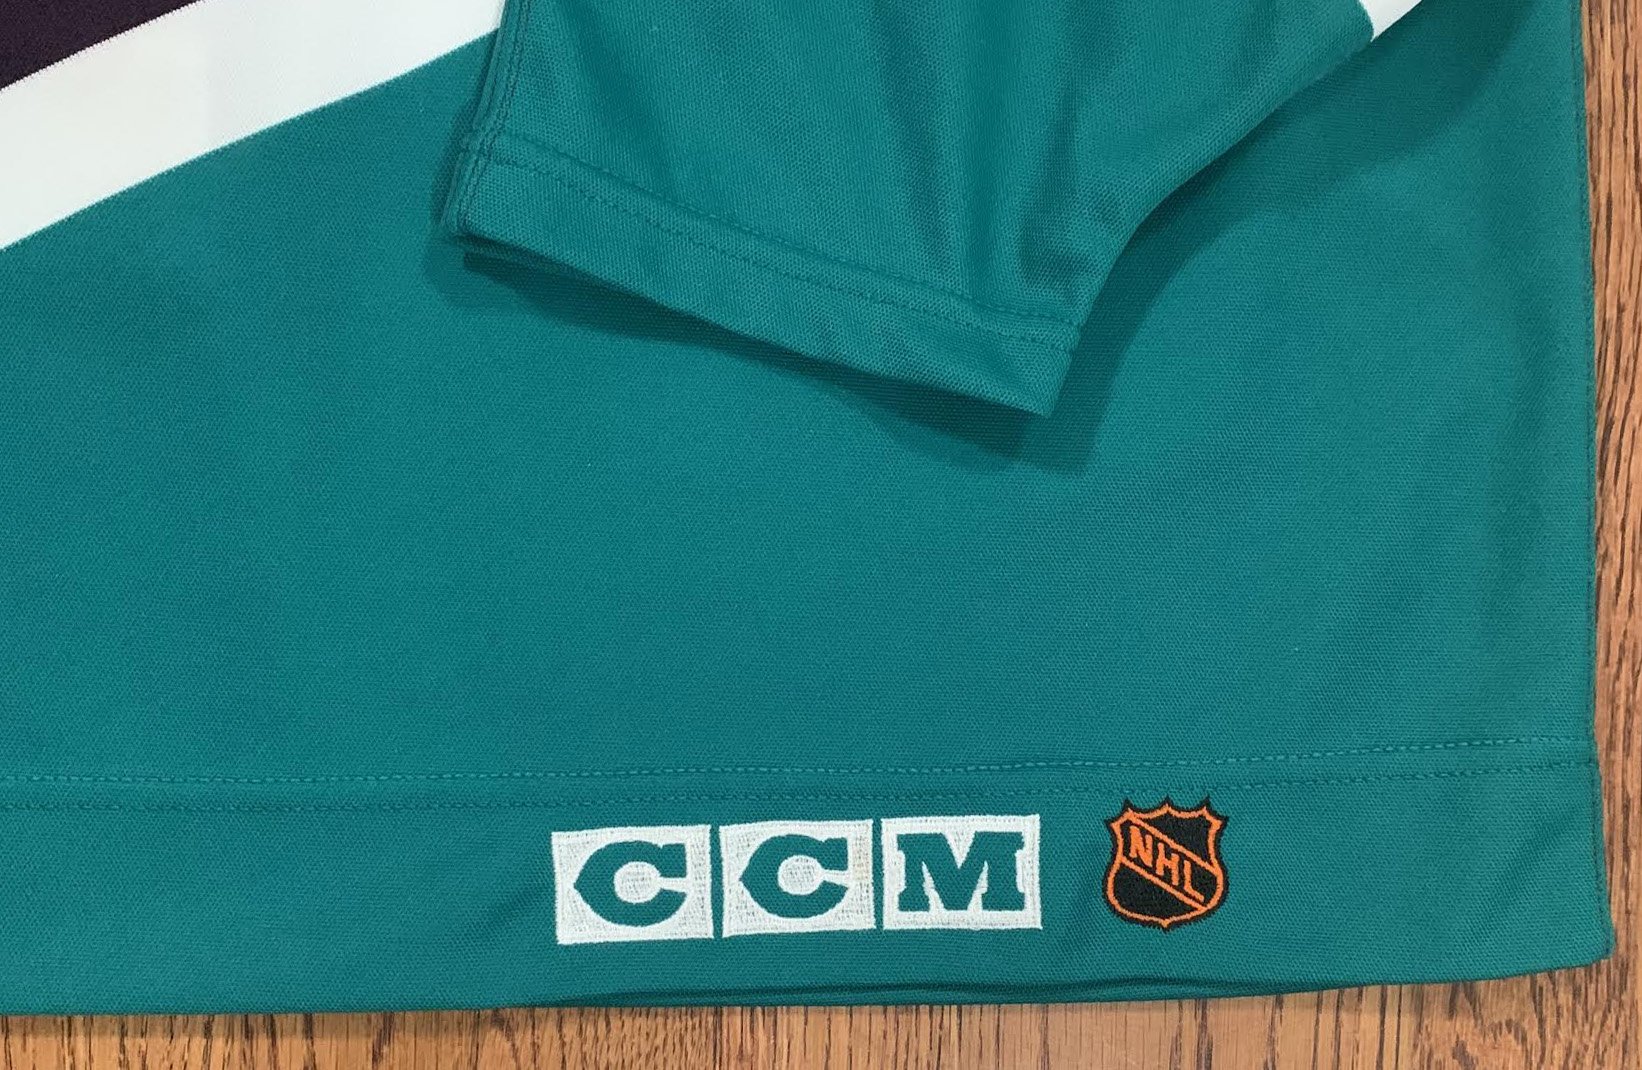 Authentic Center Ice CCM Anaheim Mighty Ducks NHL Jersey Fight Strap - Size  54